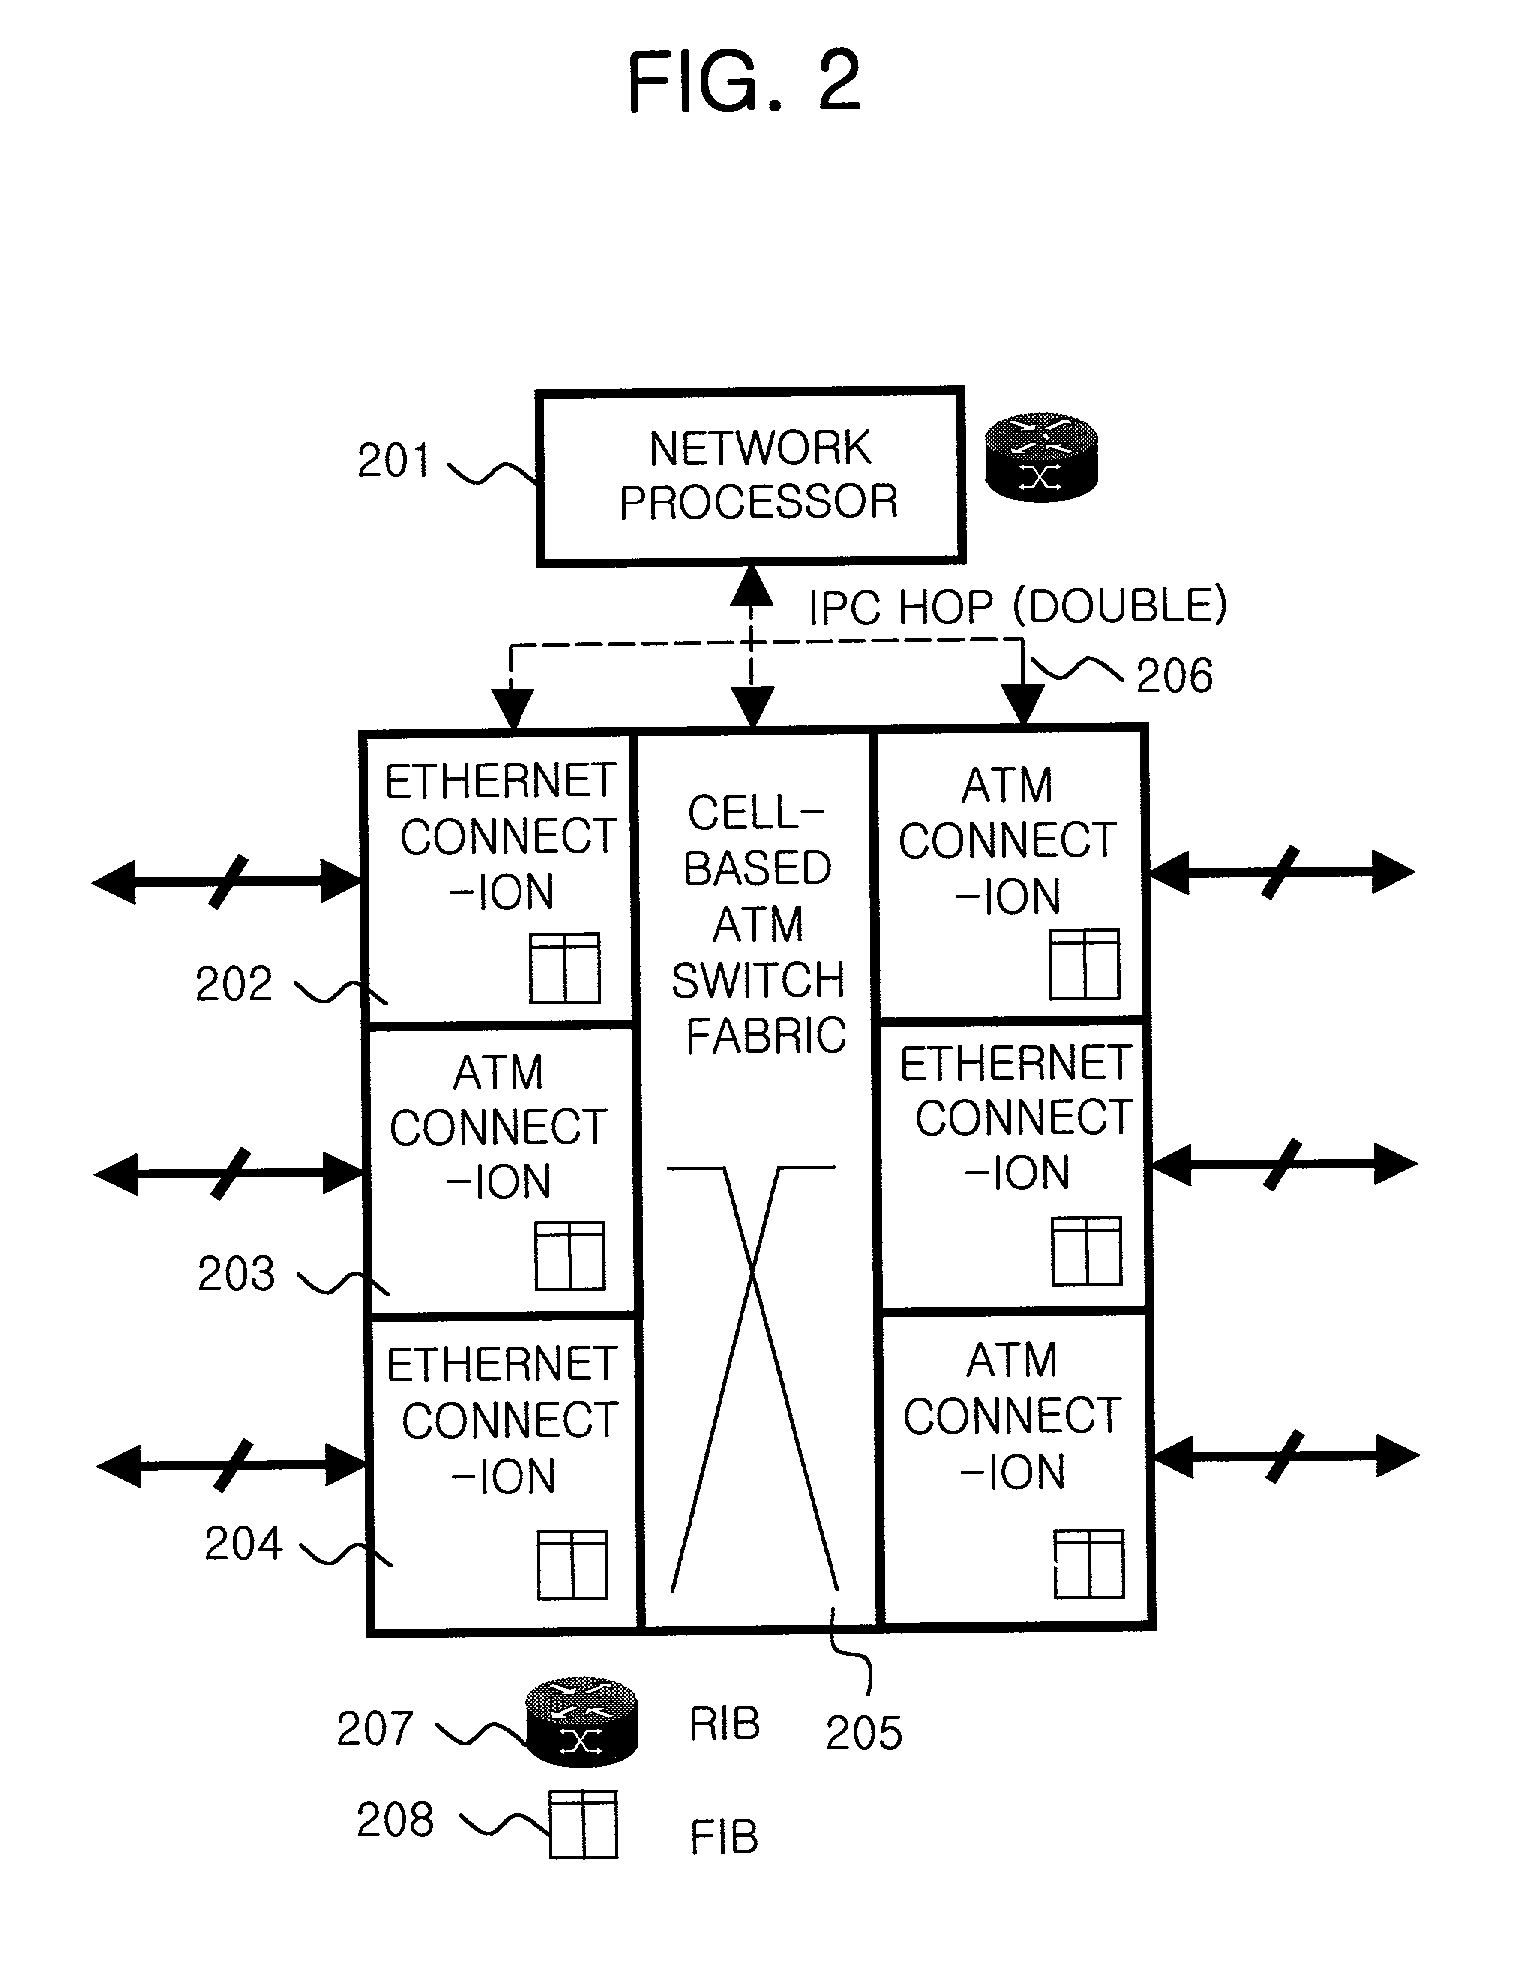 Apparatus and method for dispersively processing QoS supported IP packet forwarding